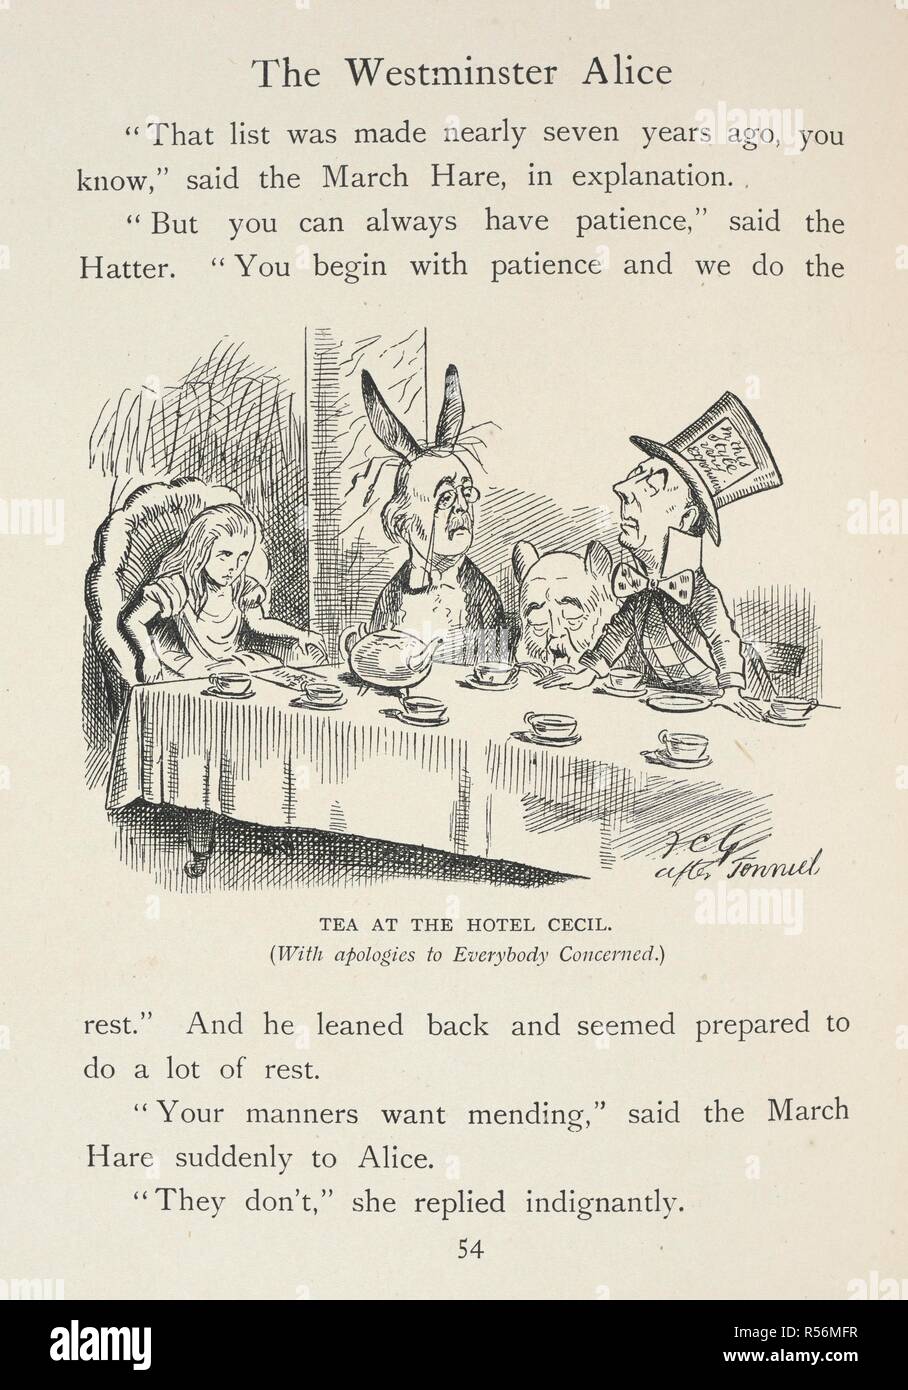 Alice has tea at the Hotel Cecil.  The Mad Hatter's tea party. Joseph Chamberlain is represented as the Mad Hatter;  Arthur Balfour is the March Hare, and Robert Cecil is the Dormouse.  . The Westminster Alice ... Illustrated by F. Carruthers Gould. London : Westminster Gazette, 1902. Source: 12332.ff.15 page 54. Author: SAKI. GOULD, FRANCIS CARRUTHERS. Stock Photo